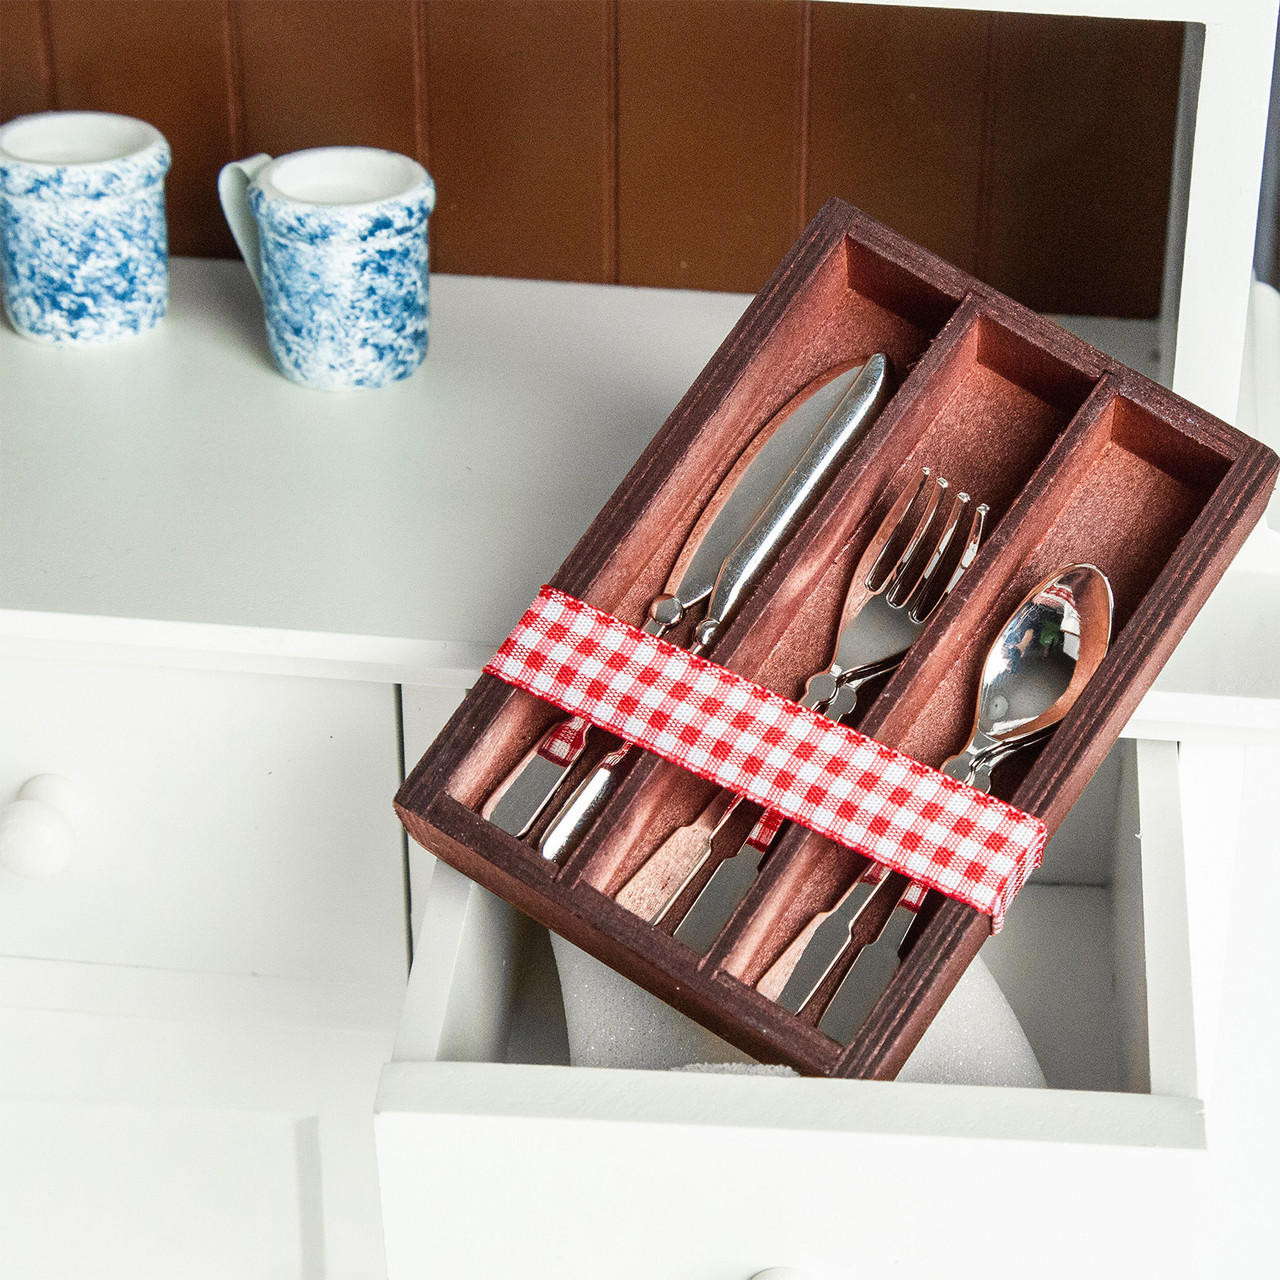 https://cdn11.bigcommerce.com/s-m5vcu70215/images/stencil/1280x1280/products/154/2442/the-queens-treasures-13-piece-silverware-set-with-wooden-holder-accessories-for-18-inch-dolls__80558.1692298968.jpg?c=1